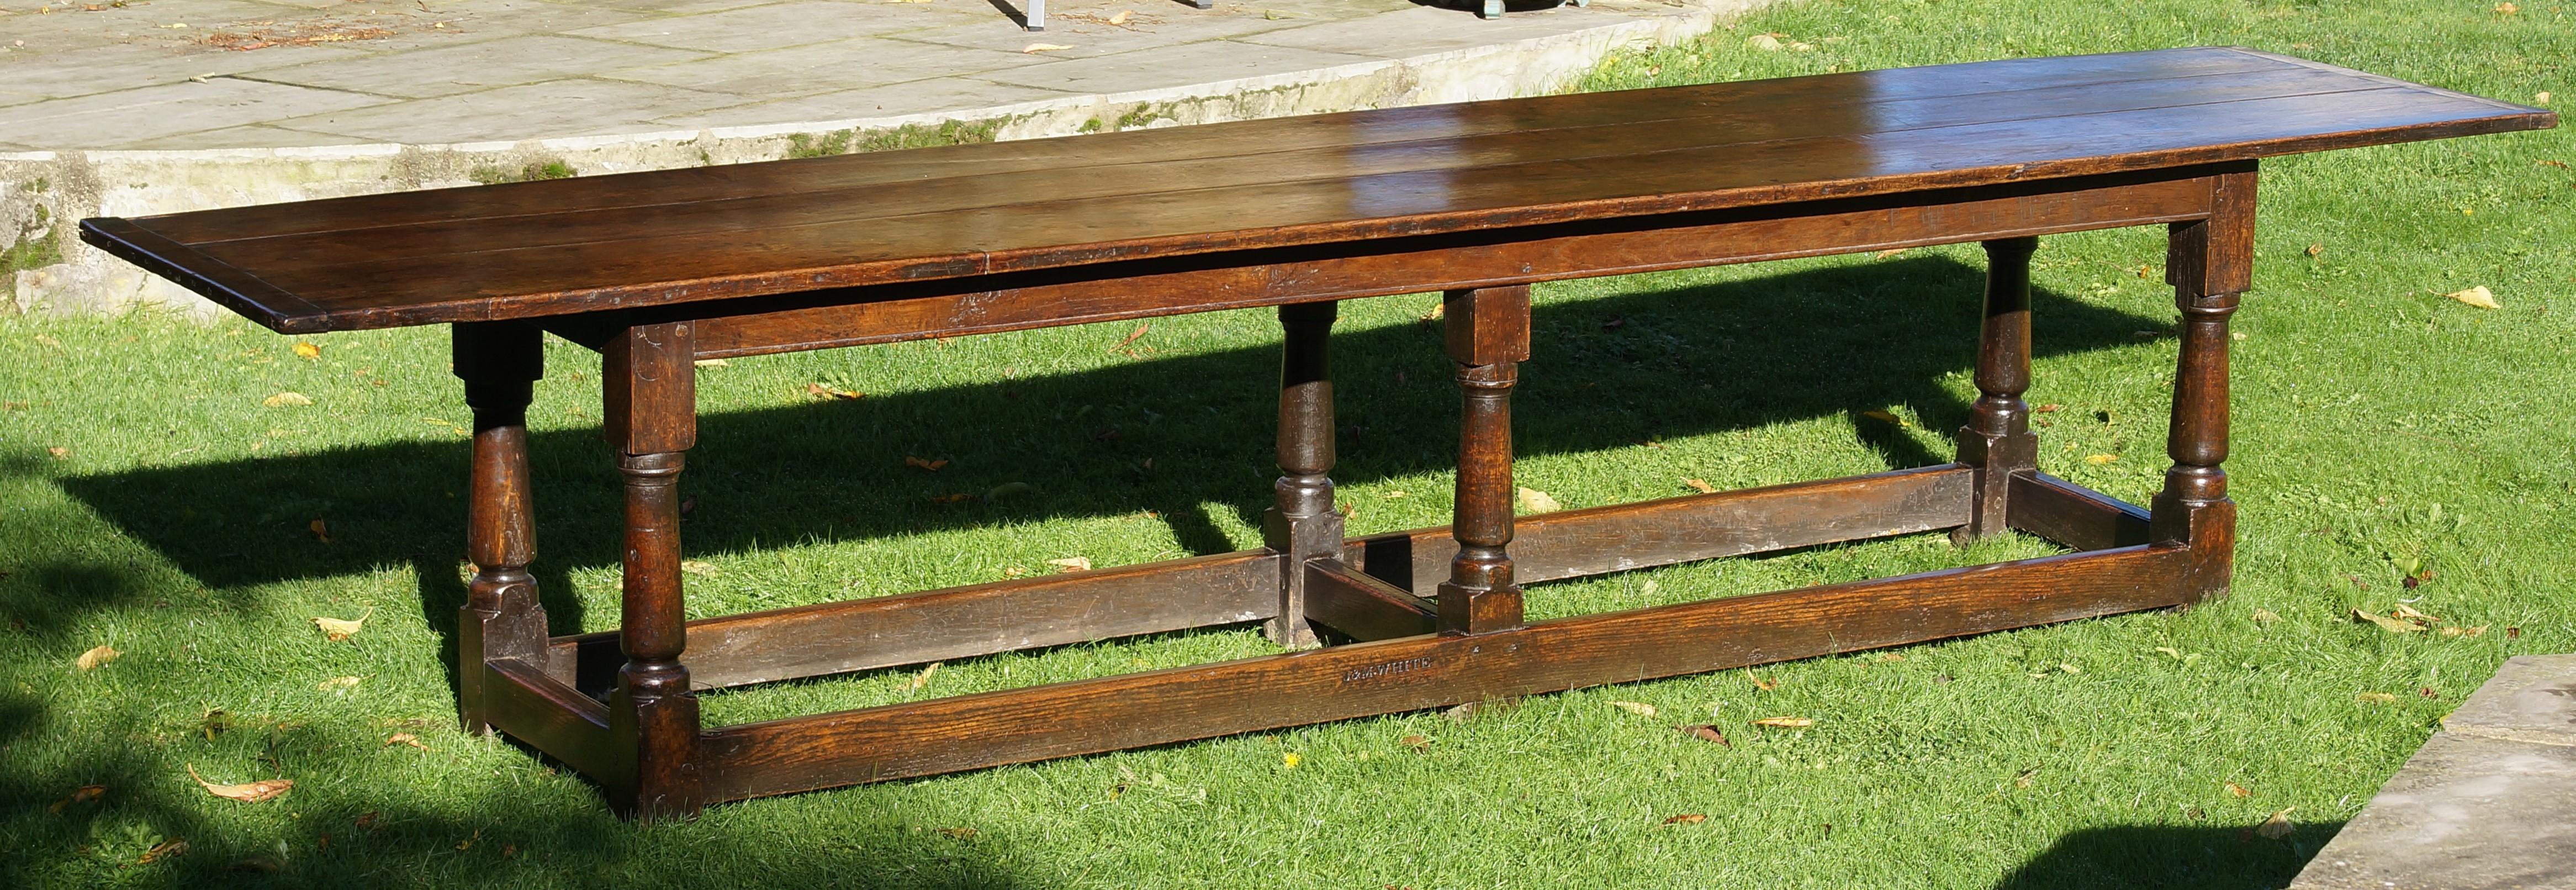 Jacobean Large 17th Century Oak Refectory Table. kitchen/dining. For Sale